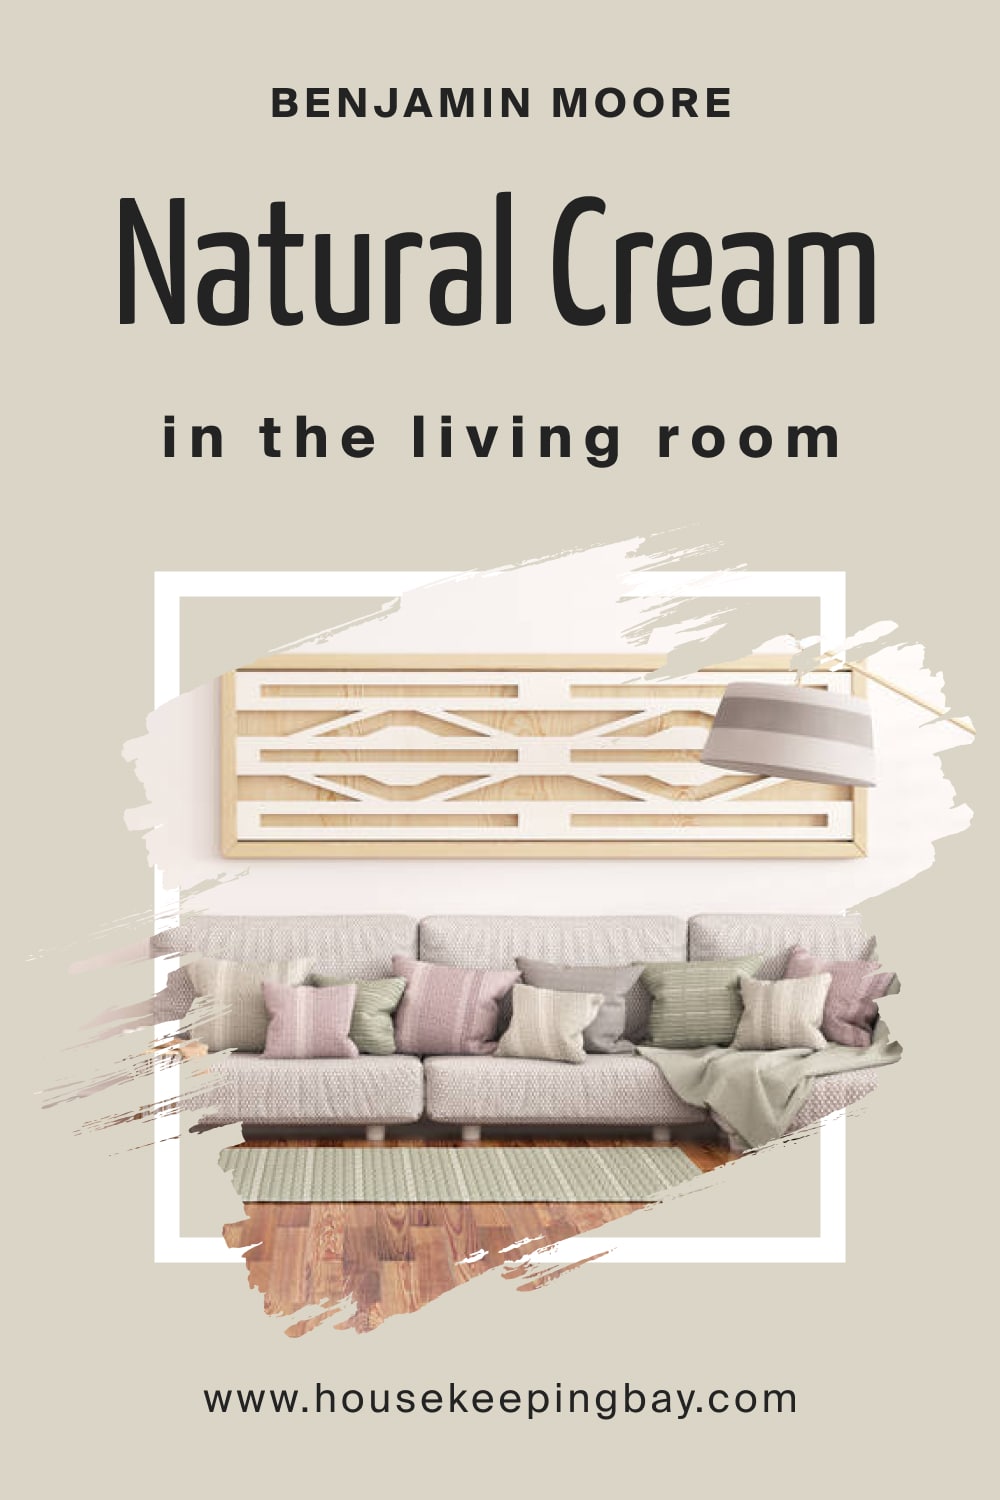 Sherwin Williams. Natural Cream OC 14 In the Living Room